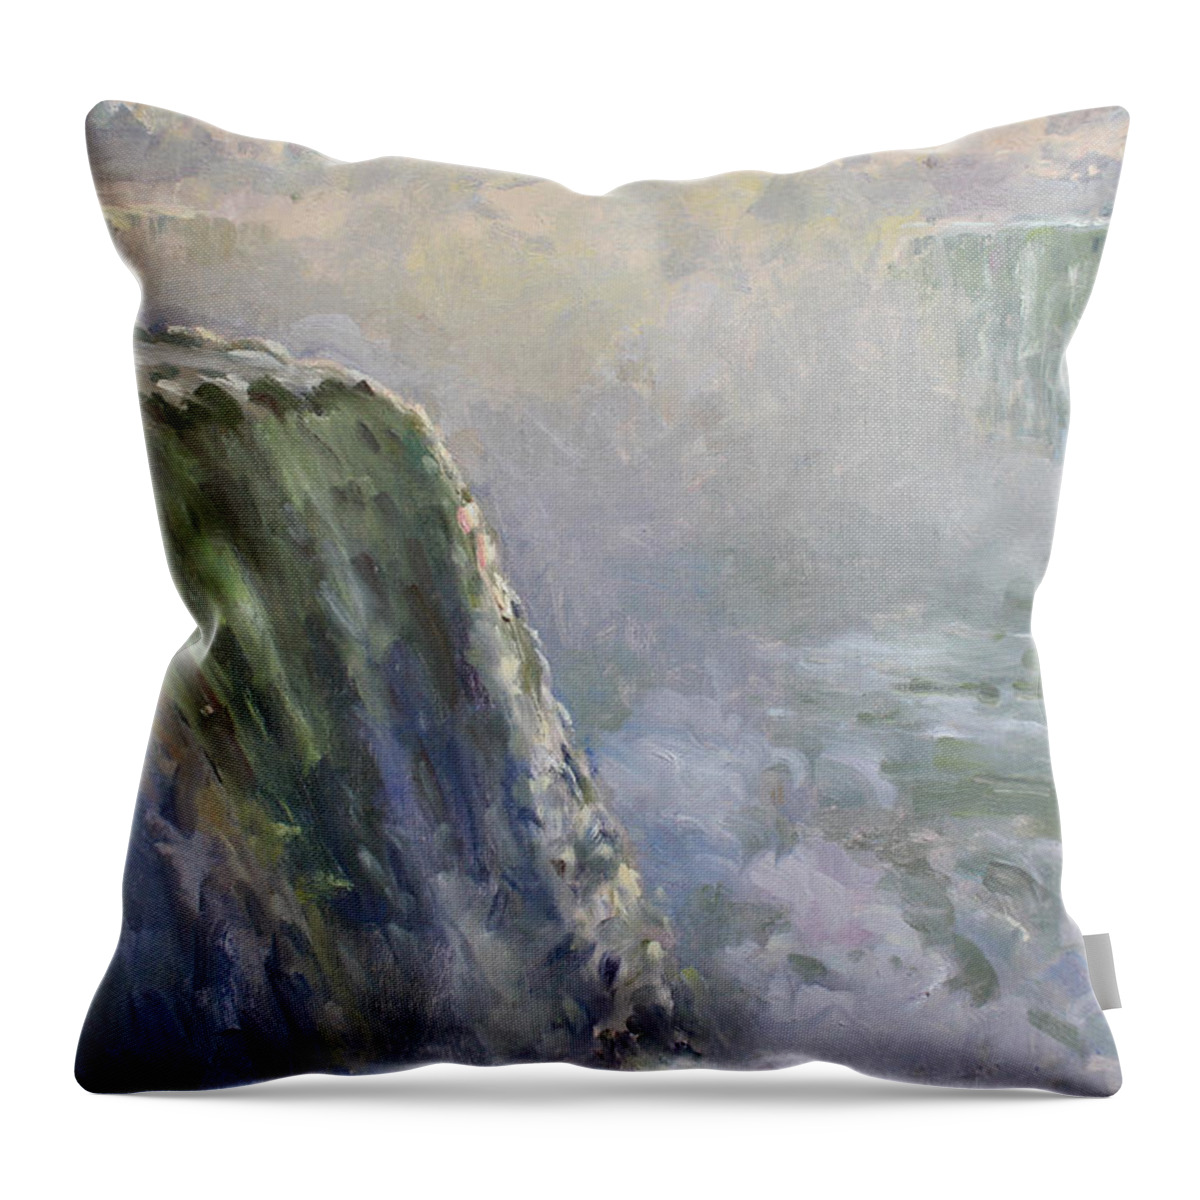 Mist Throw Pillow featuring the painting Mist at Horseshoe Falls by Ylli Haruni